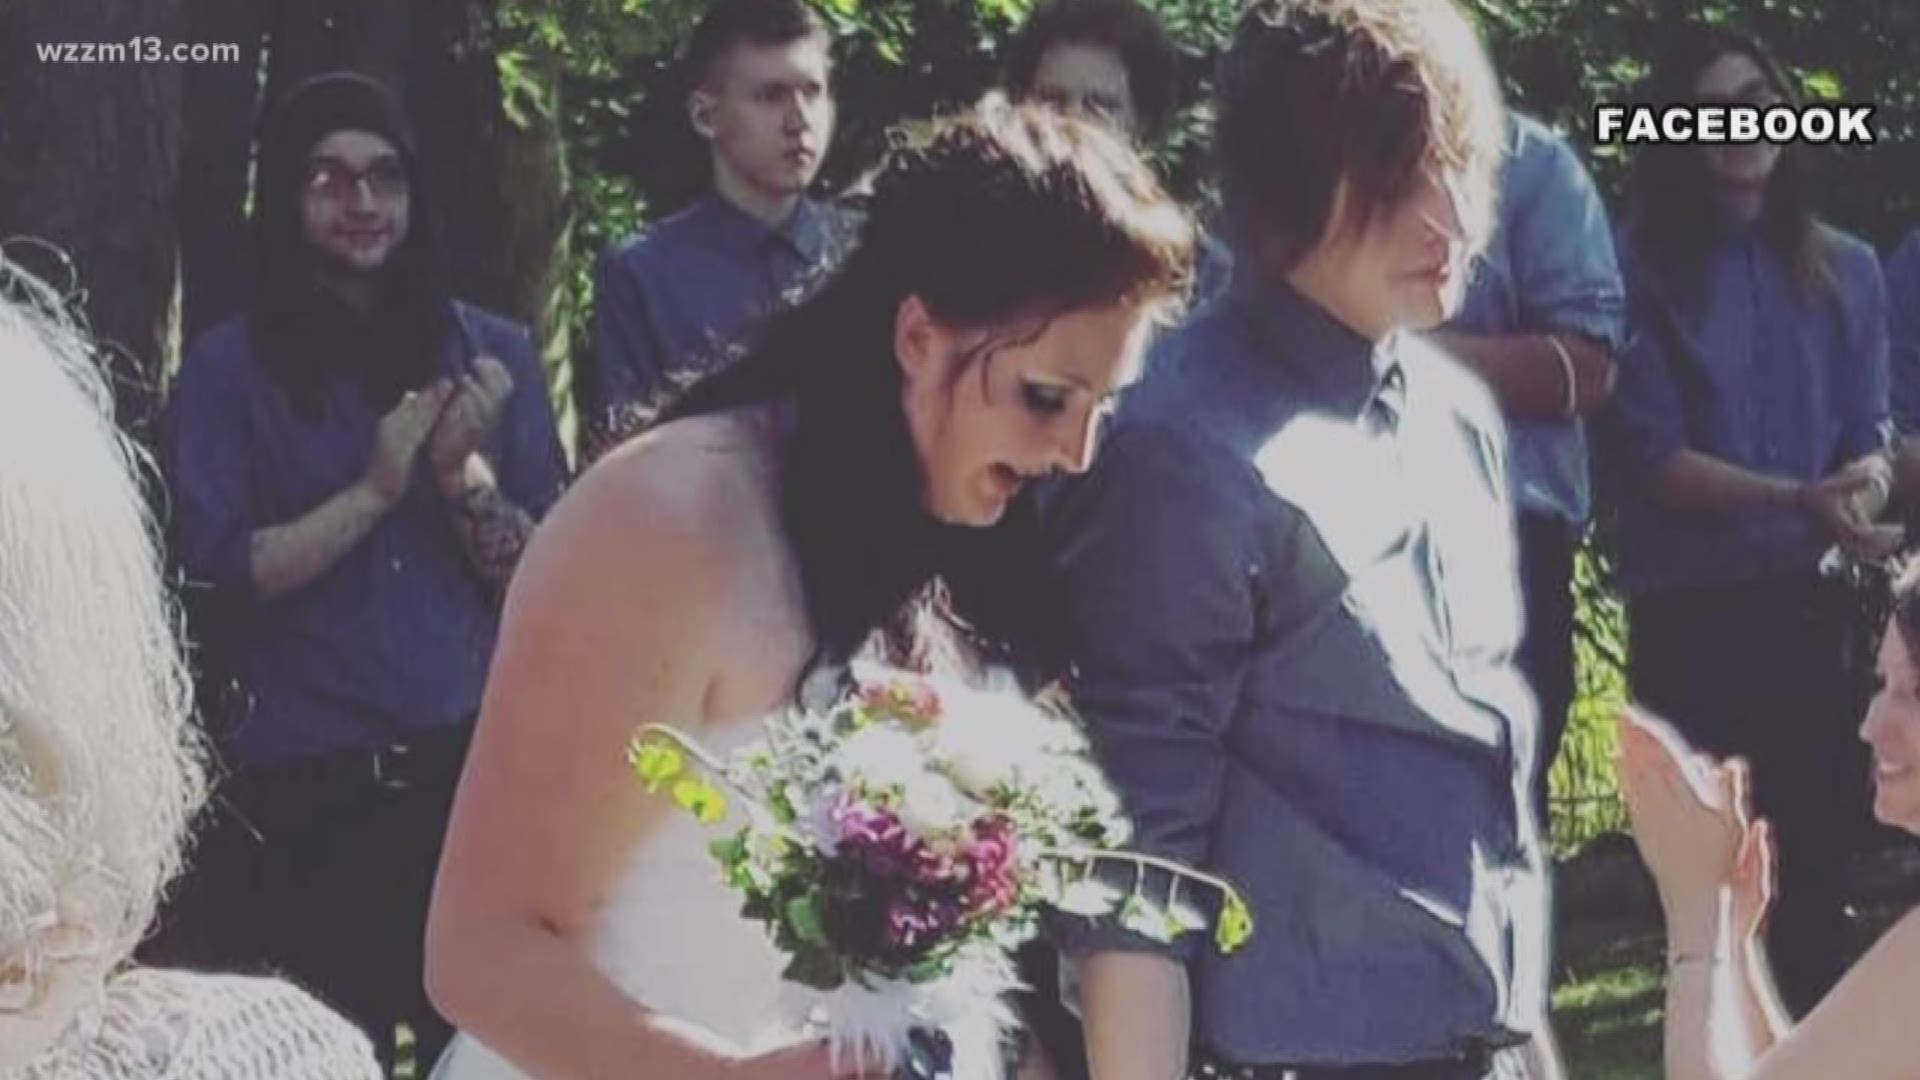 Driver charged in crash that killed newlyweds